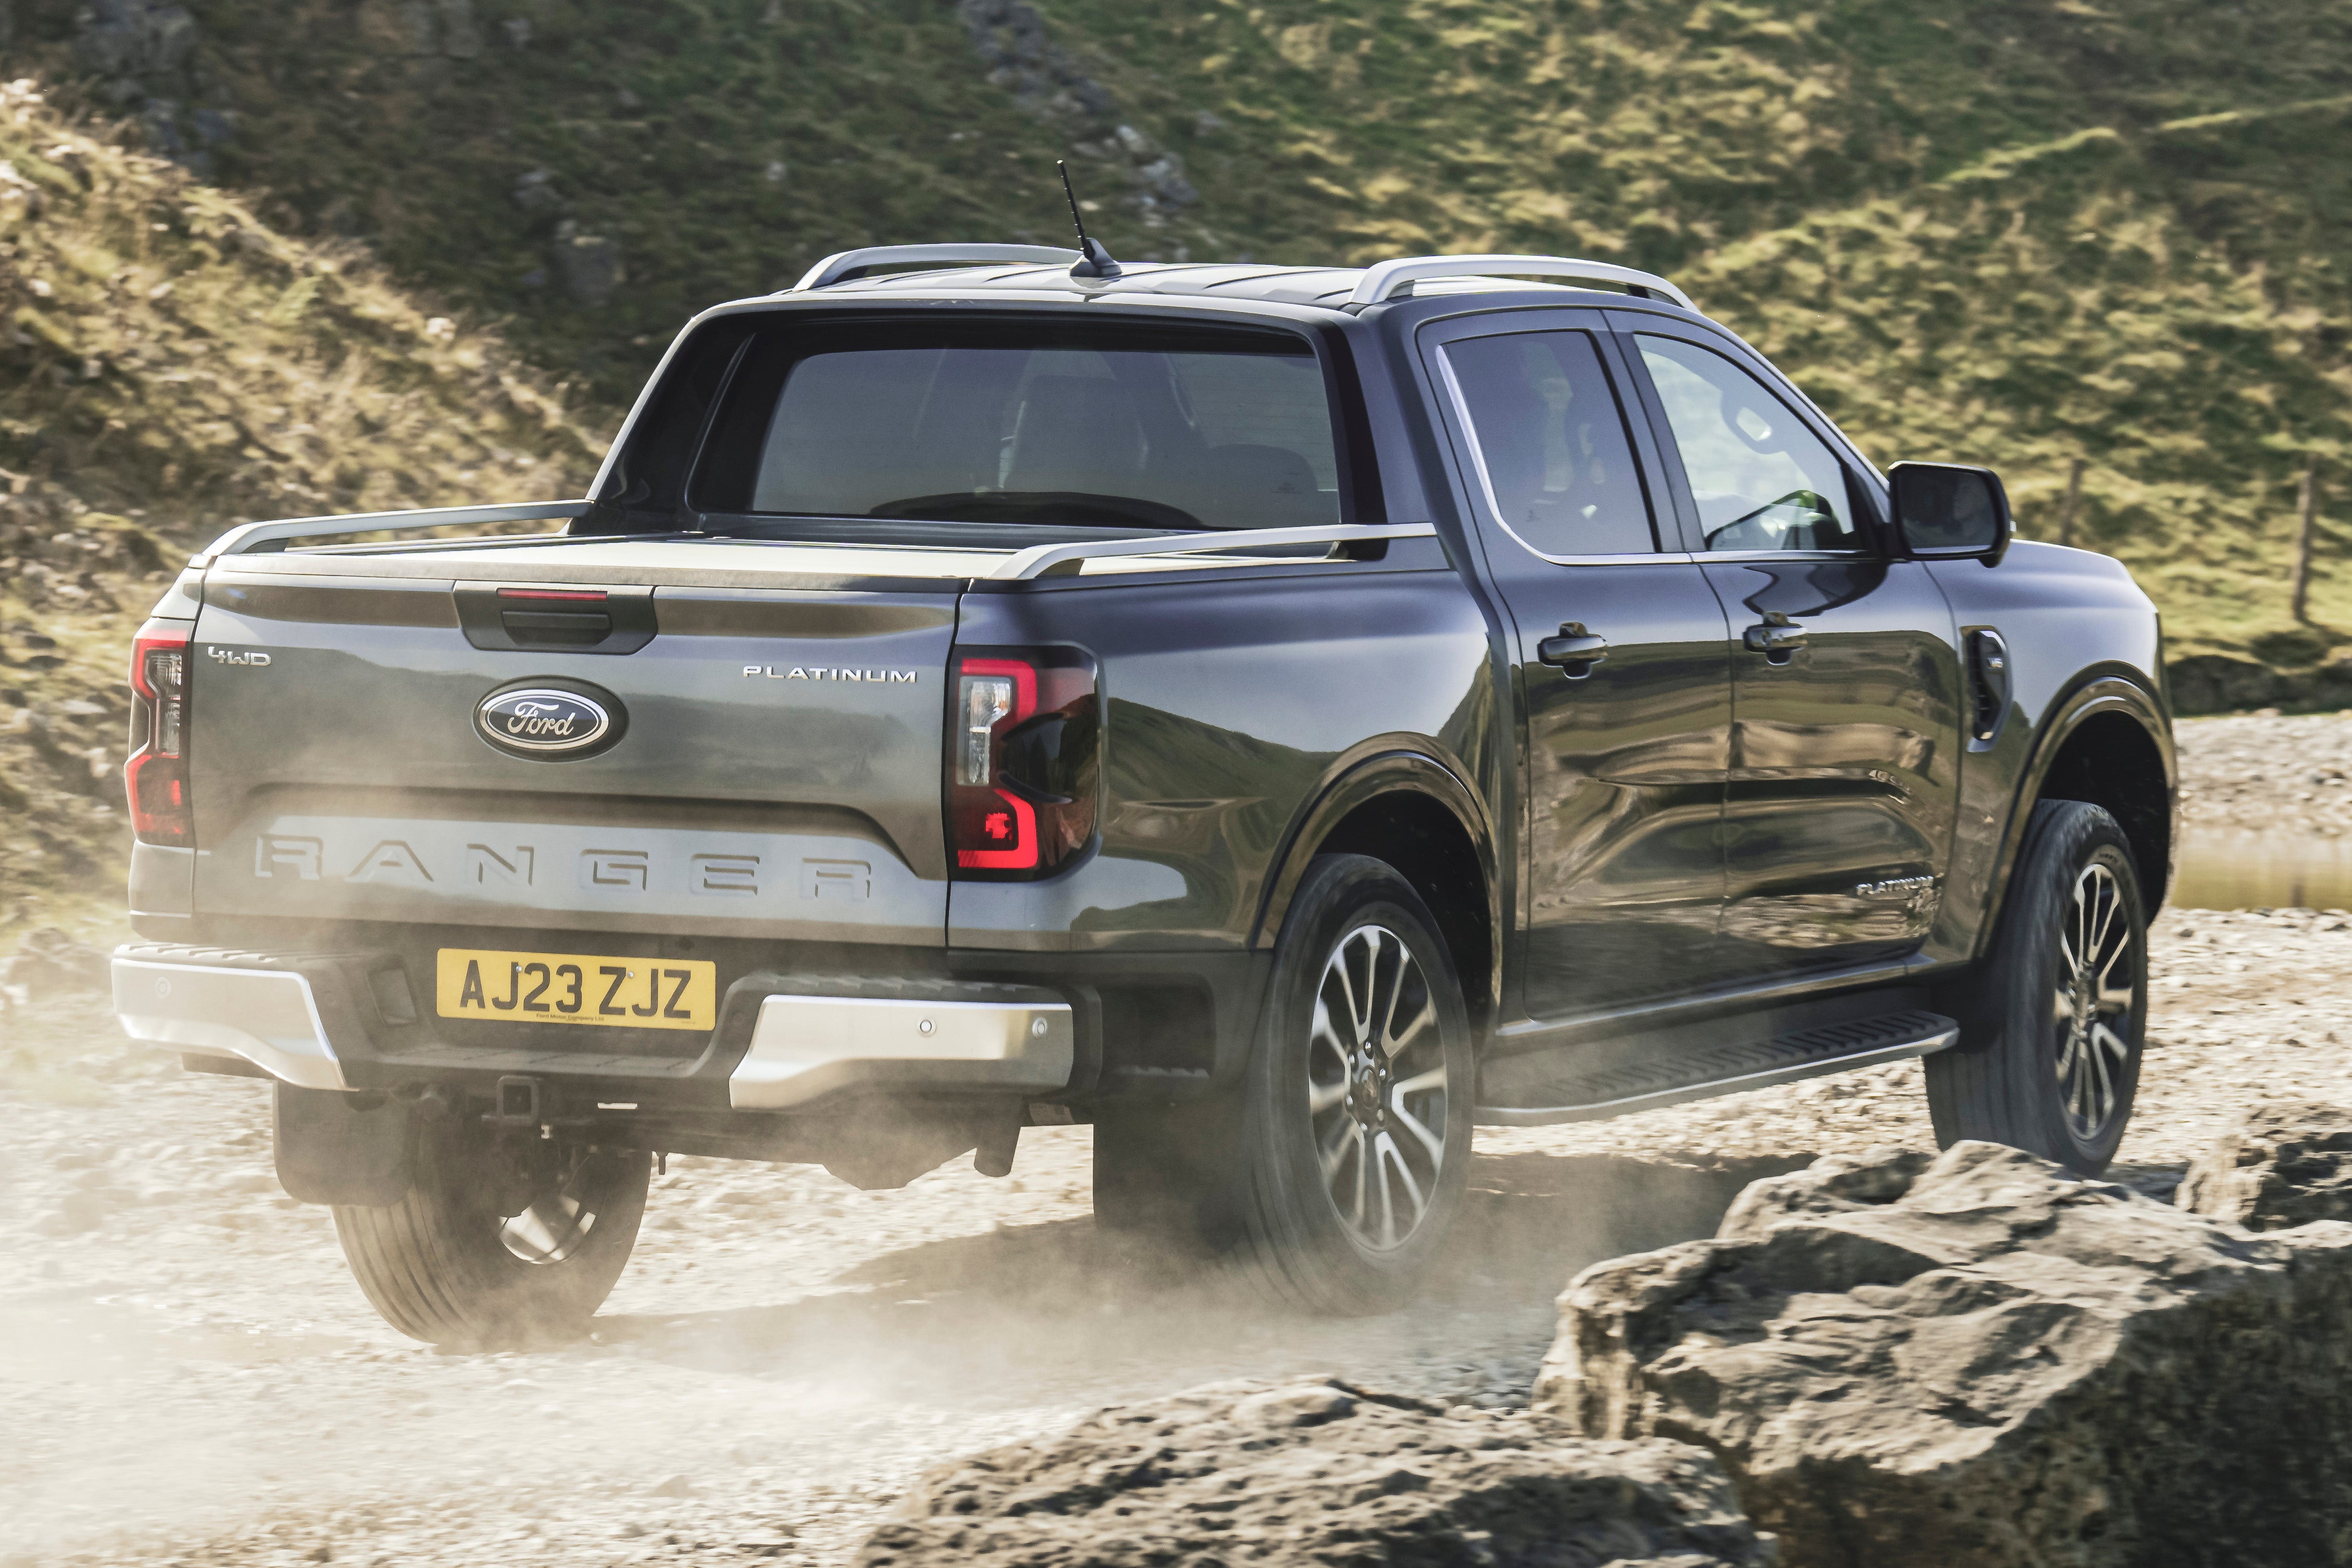 Ford Ranger dimensions, boot space and similars